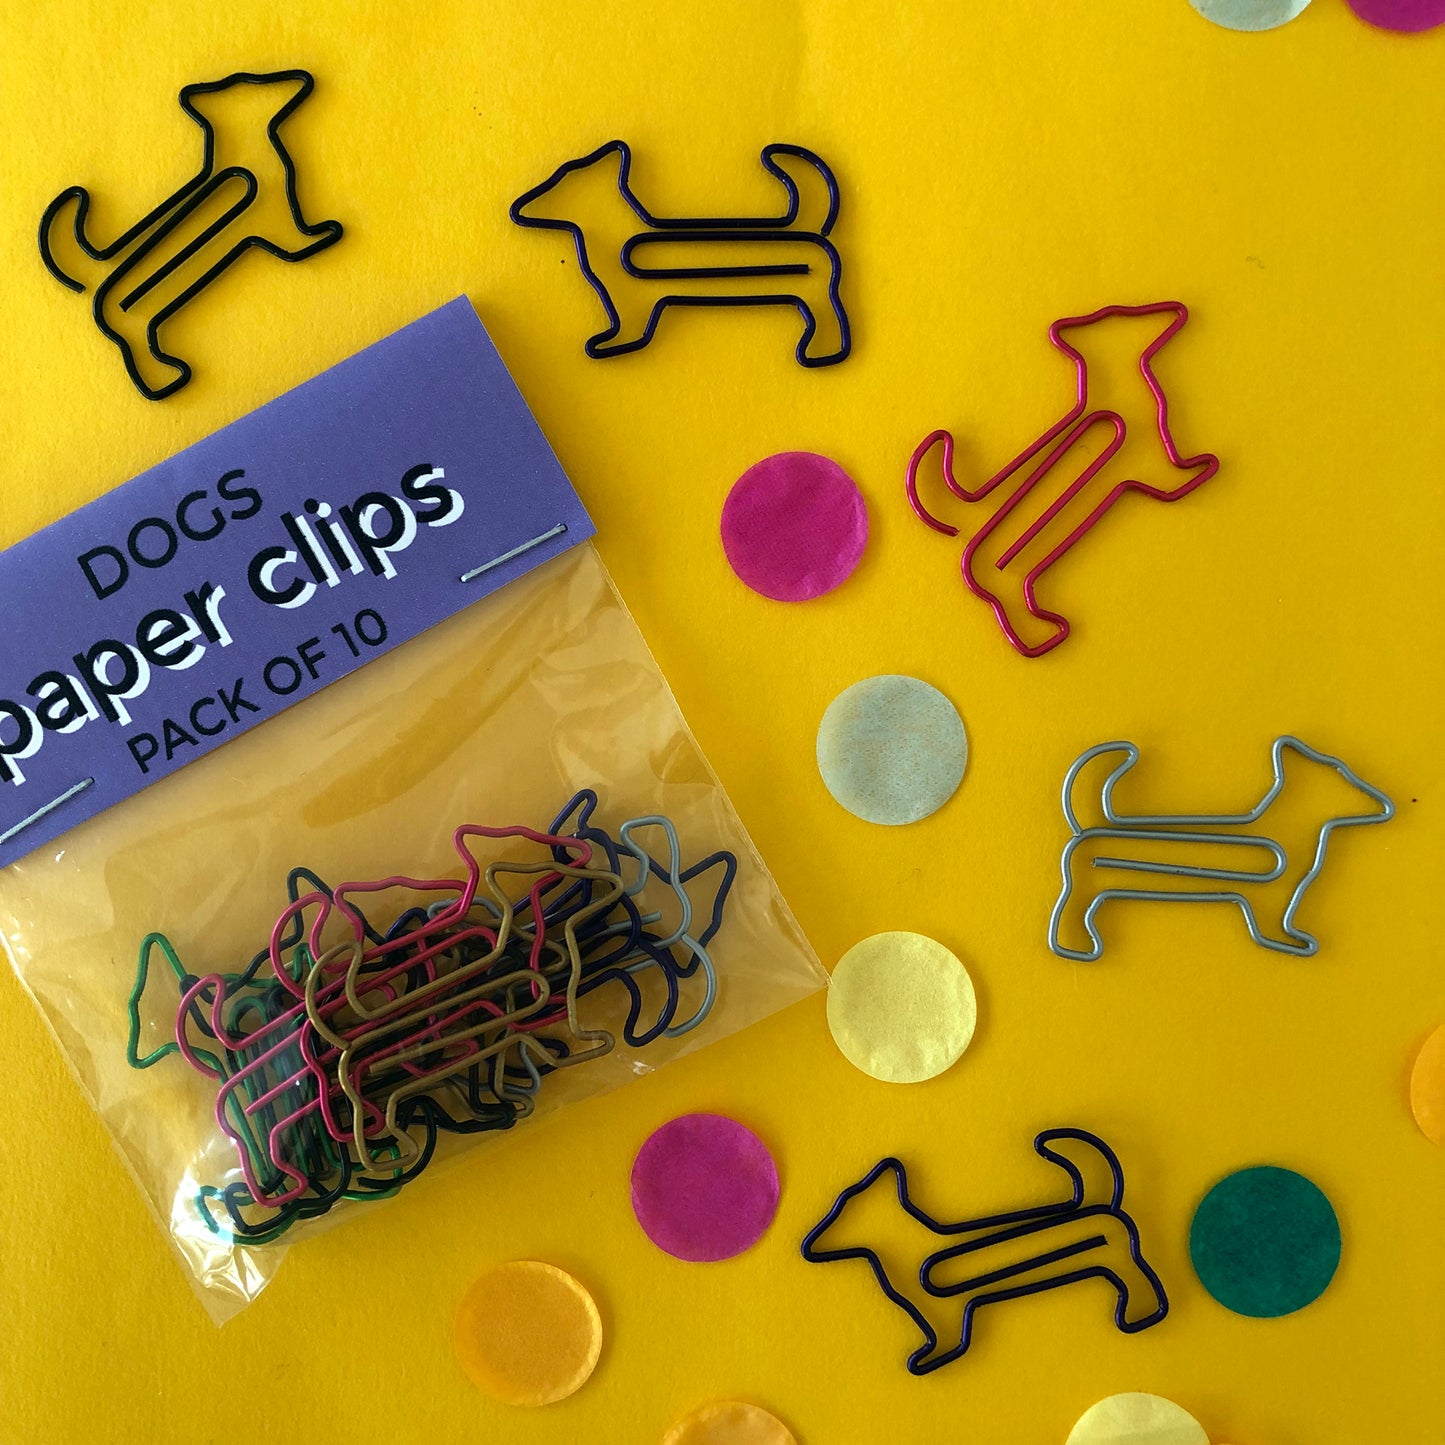 Image shows a set of cute and colourful, dog shaped paperclips.